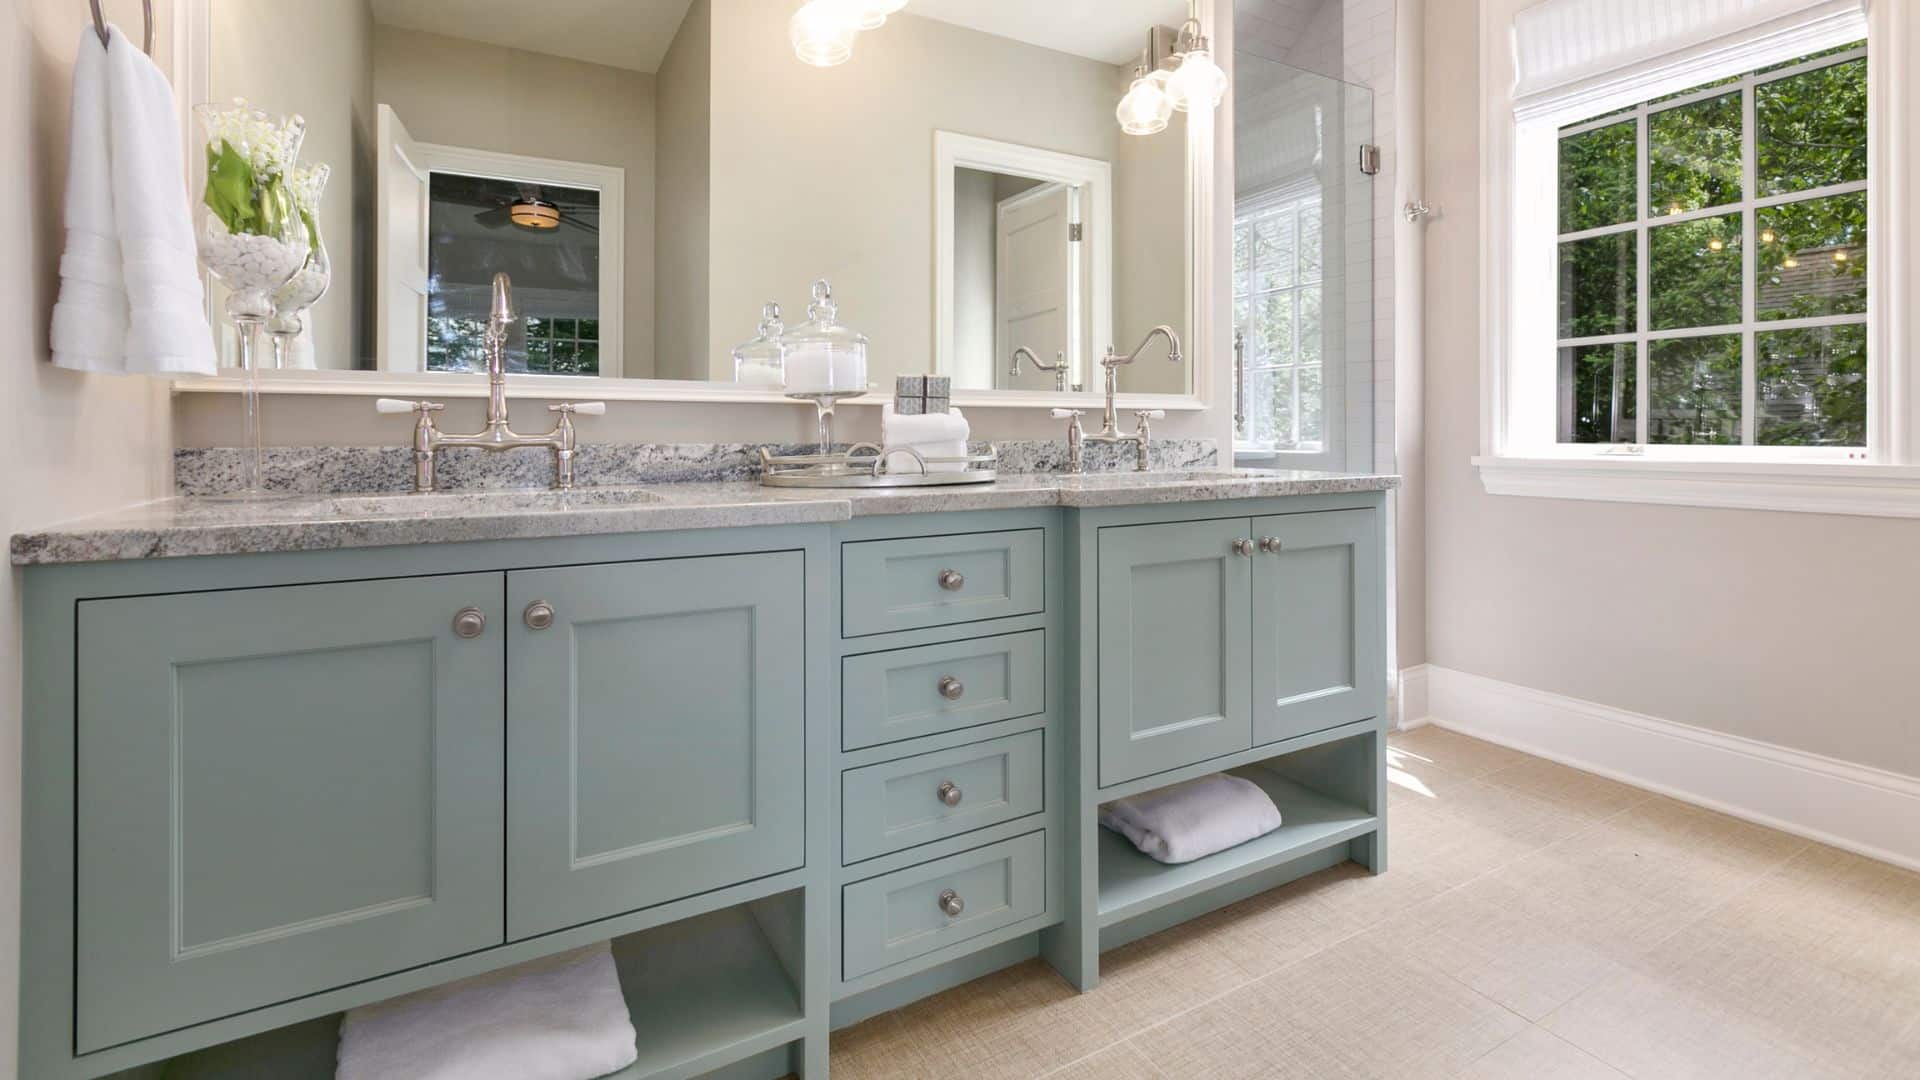 Transitional Bathroom Cabinet style with green cabinet and grey countertop